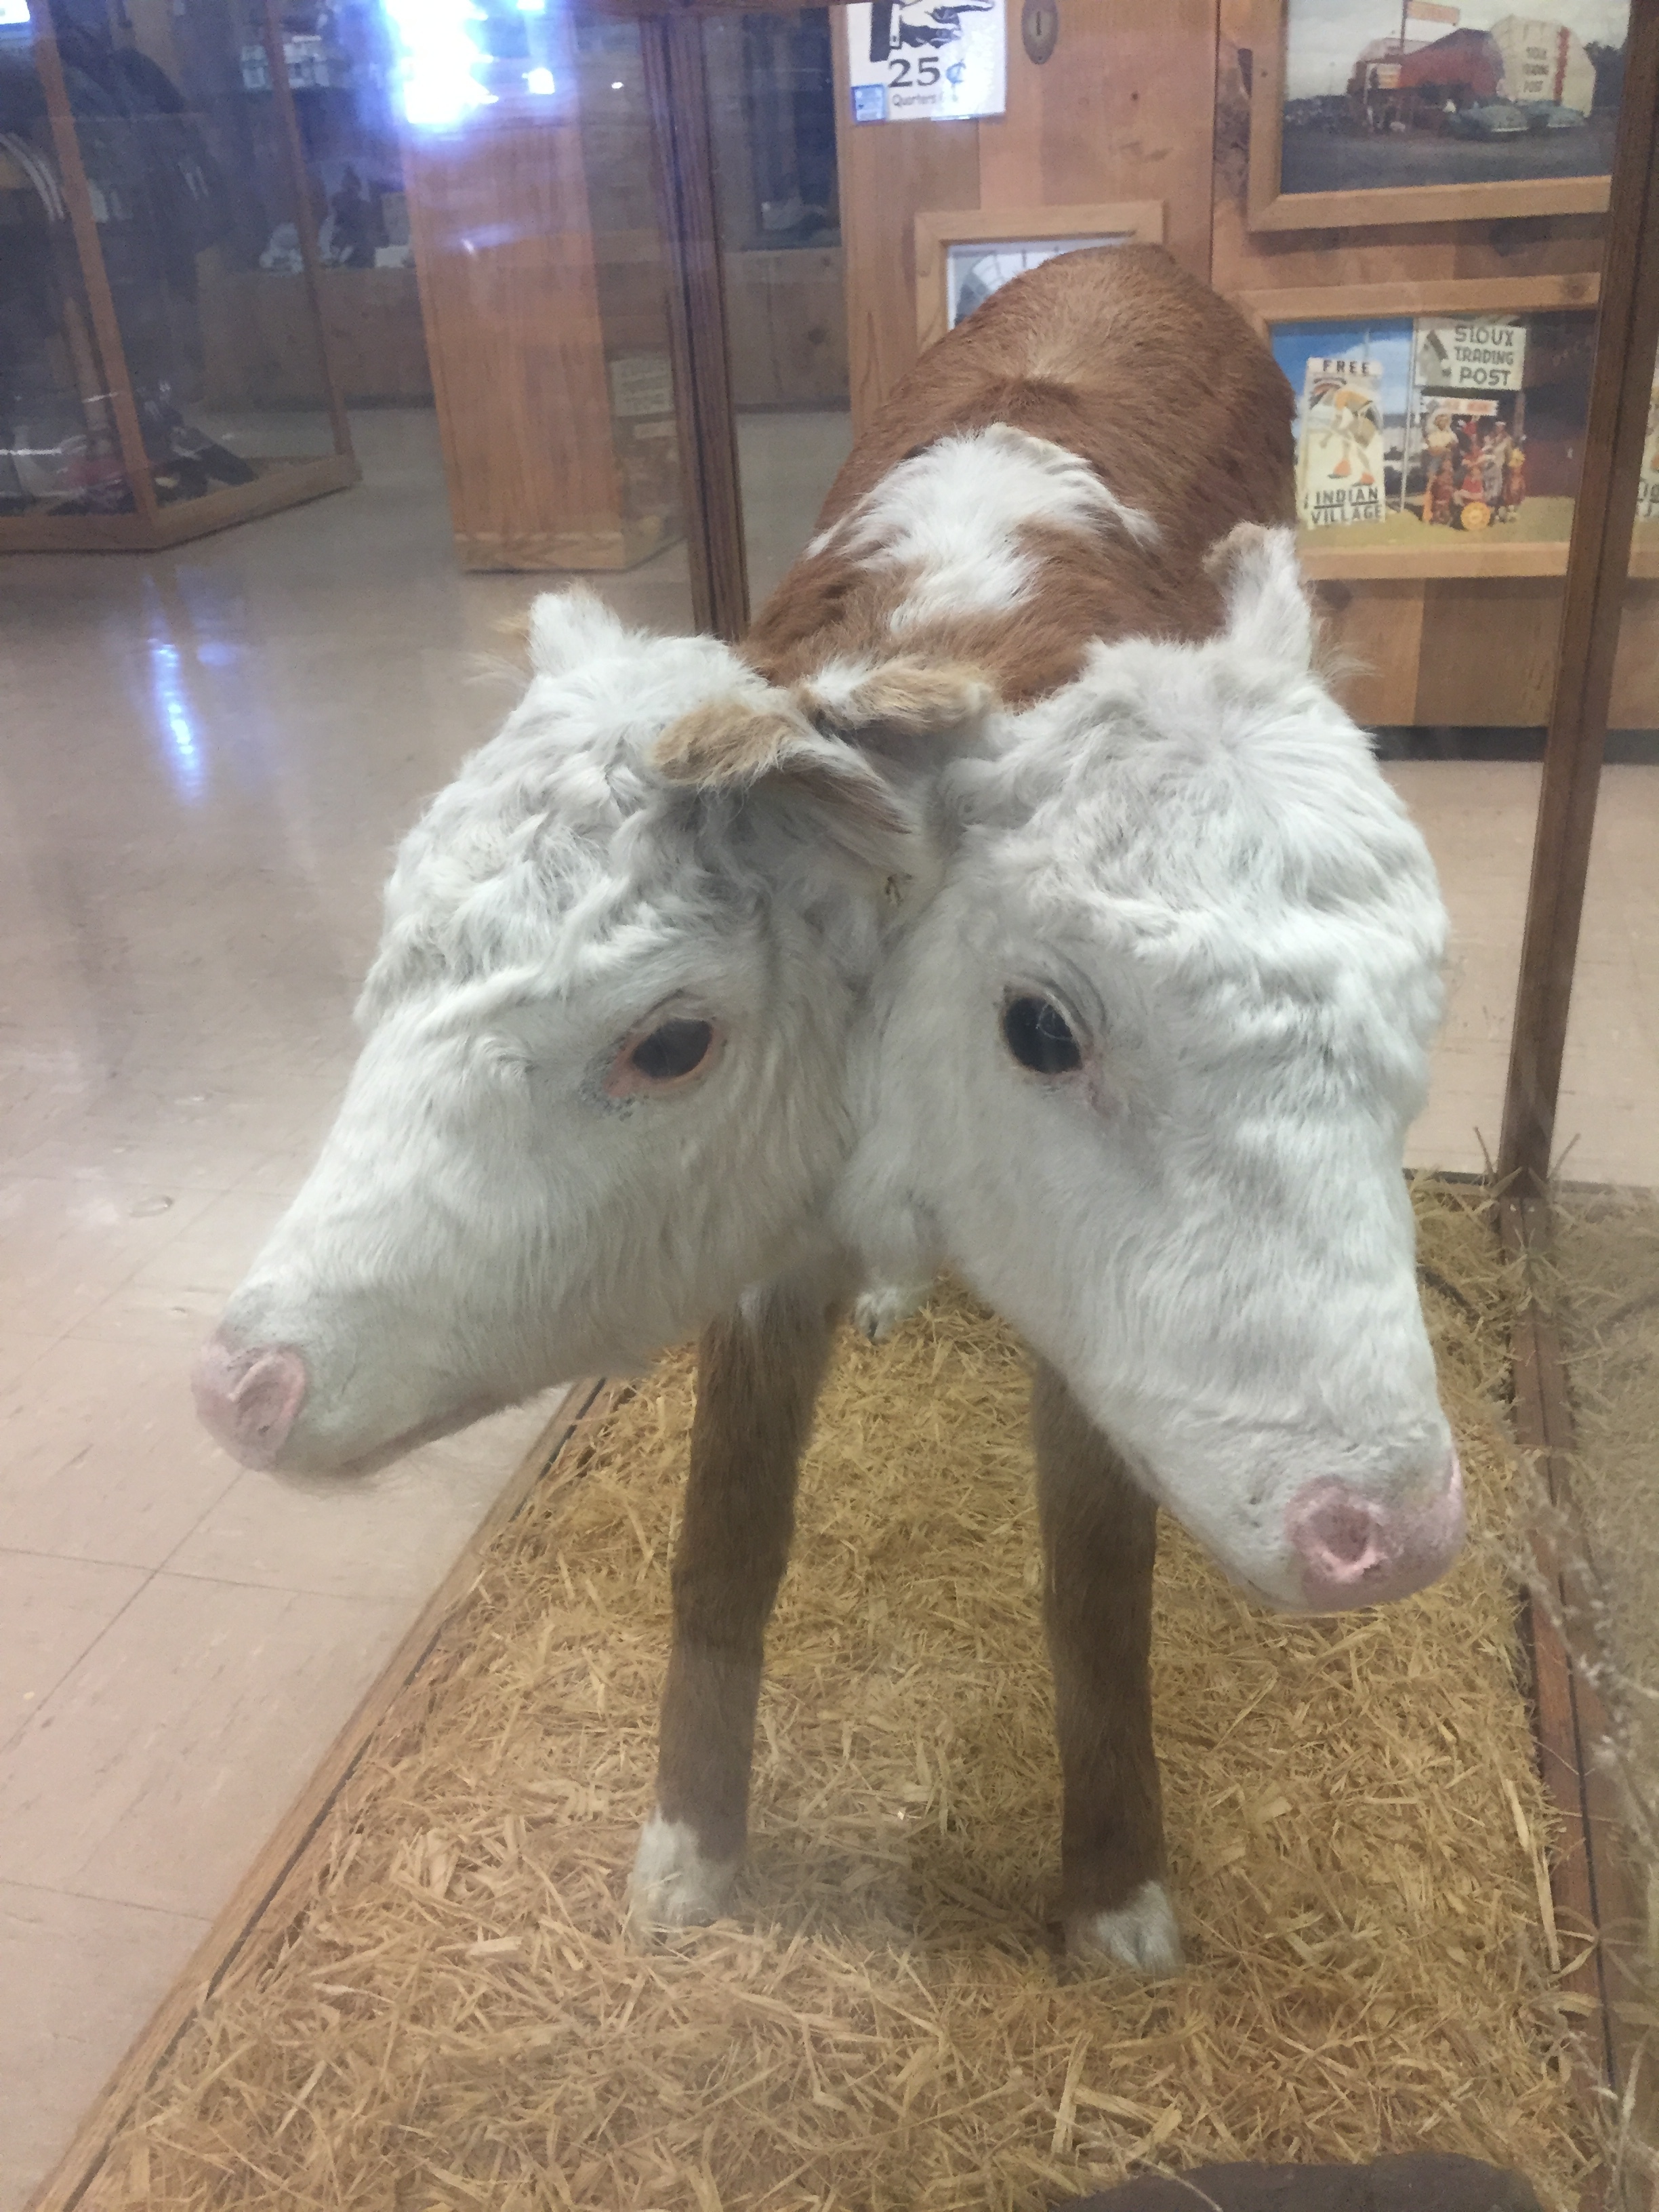 Conjoined Twin Calves